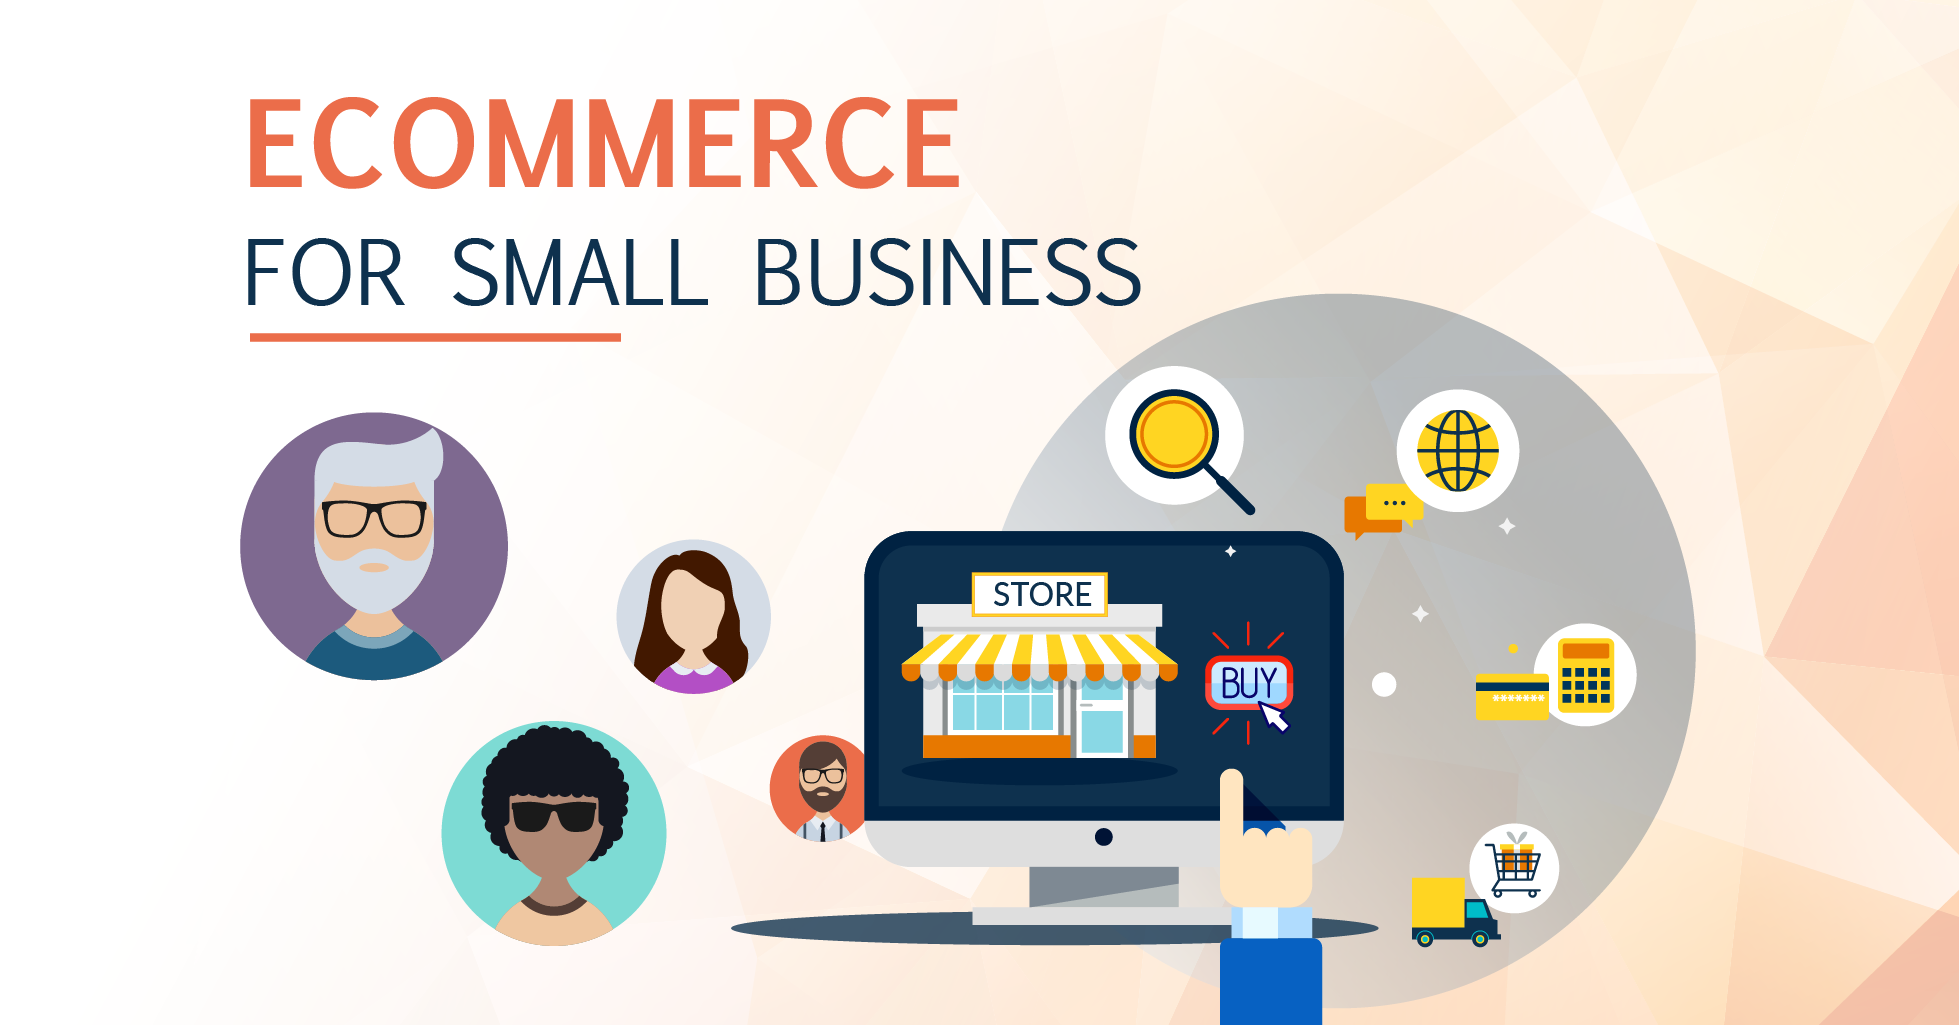 Make Your Small Business Go Online With E-Commerce